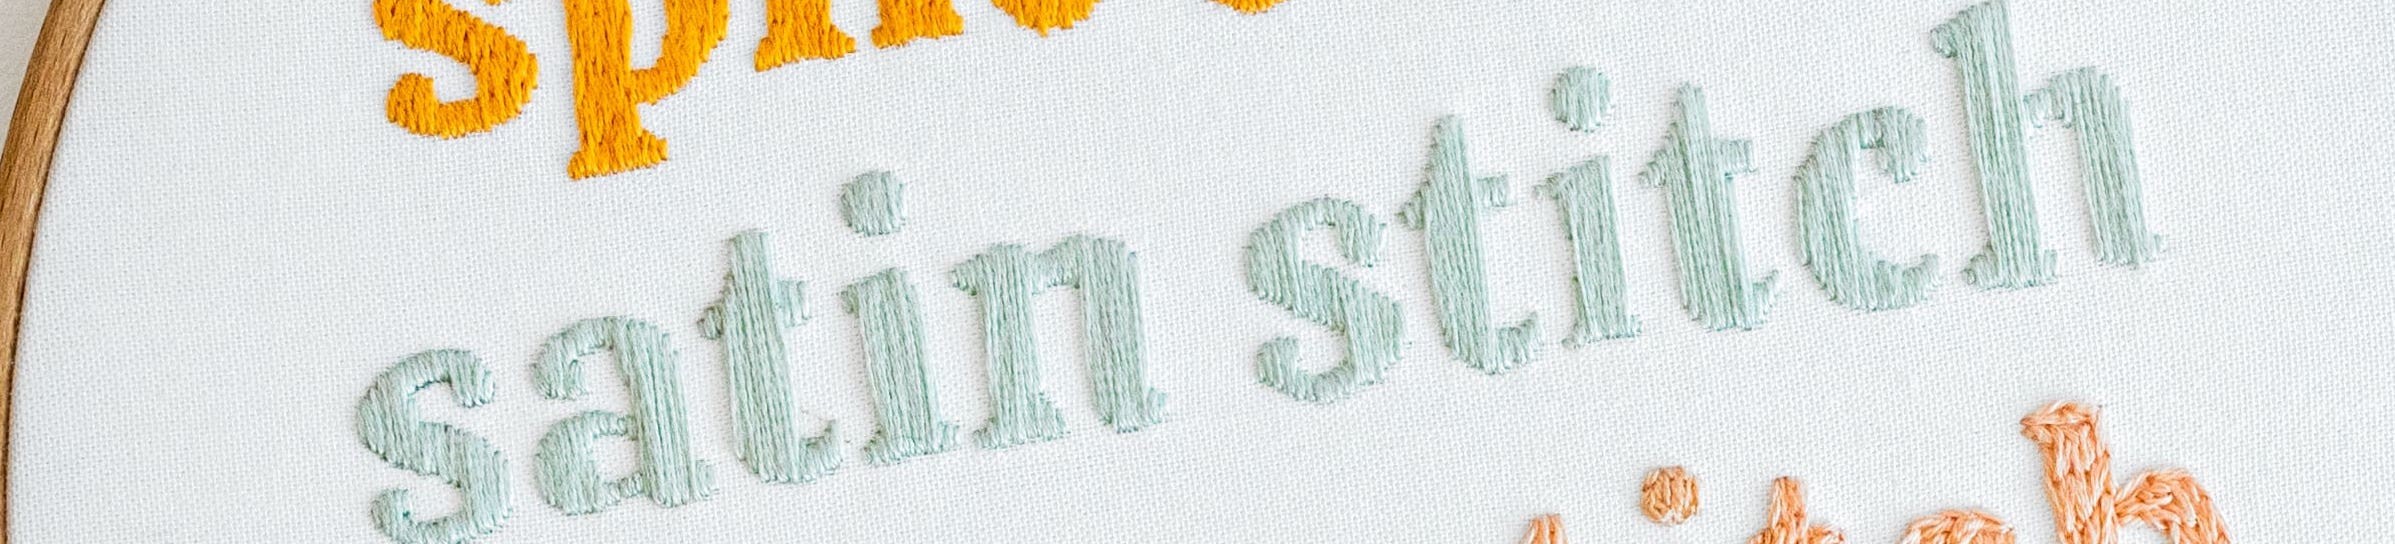 This image is of a word using satin stitch.